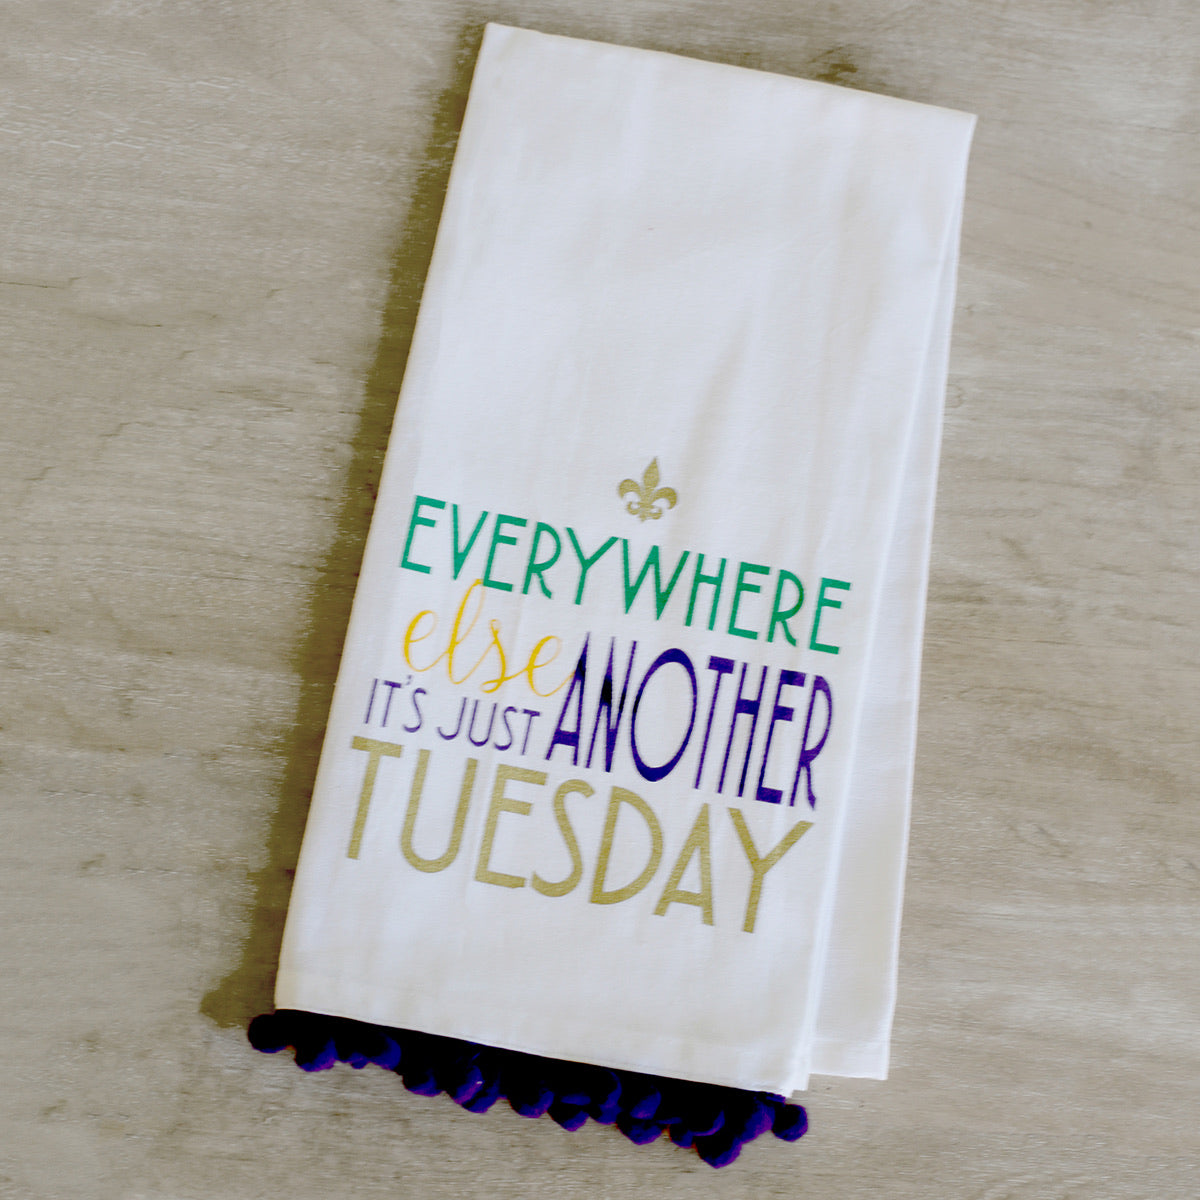 Everywhere Else is Tuesday Hand Towel